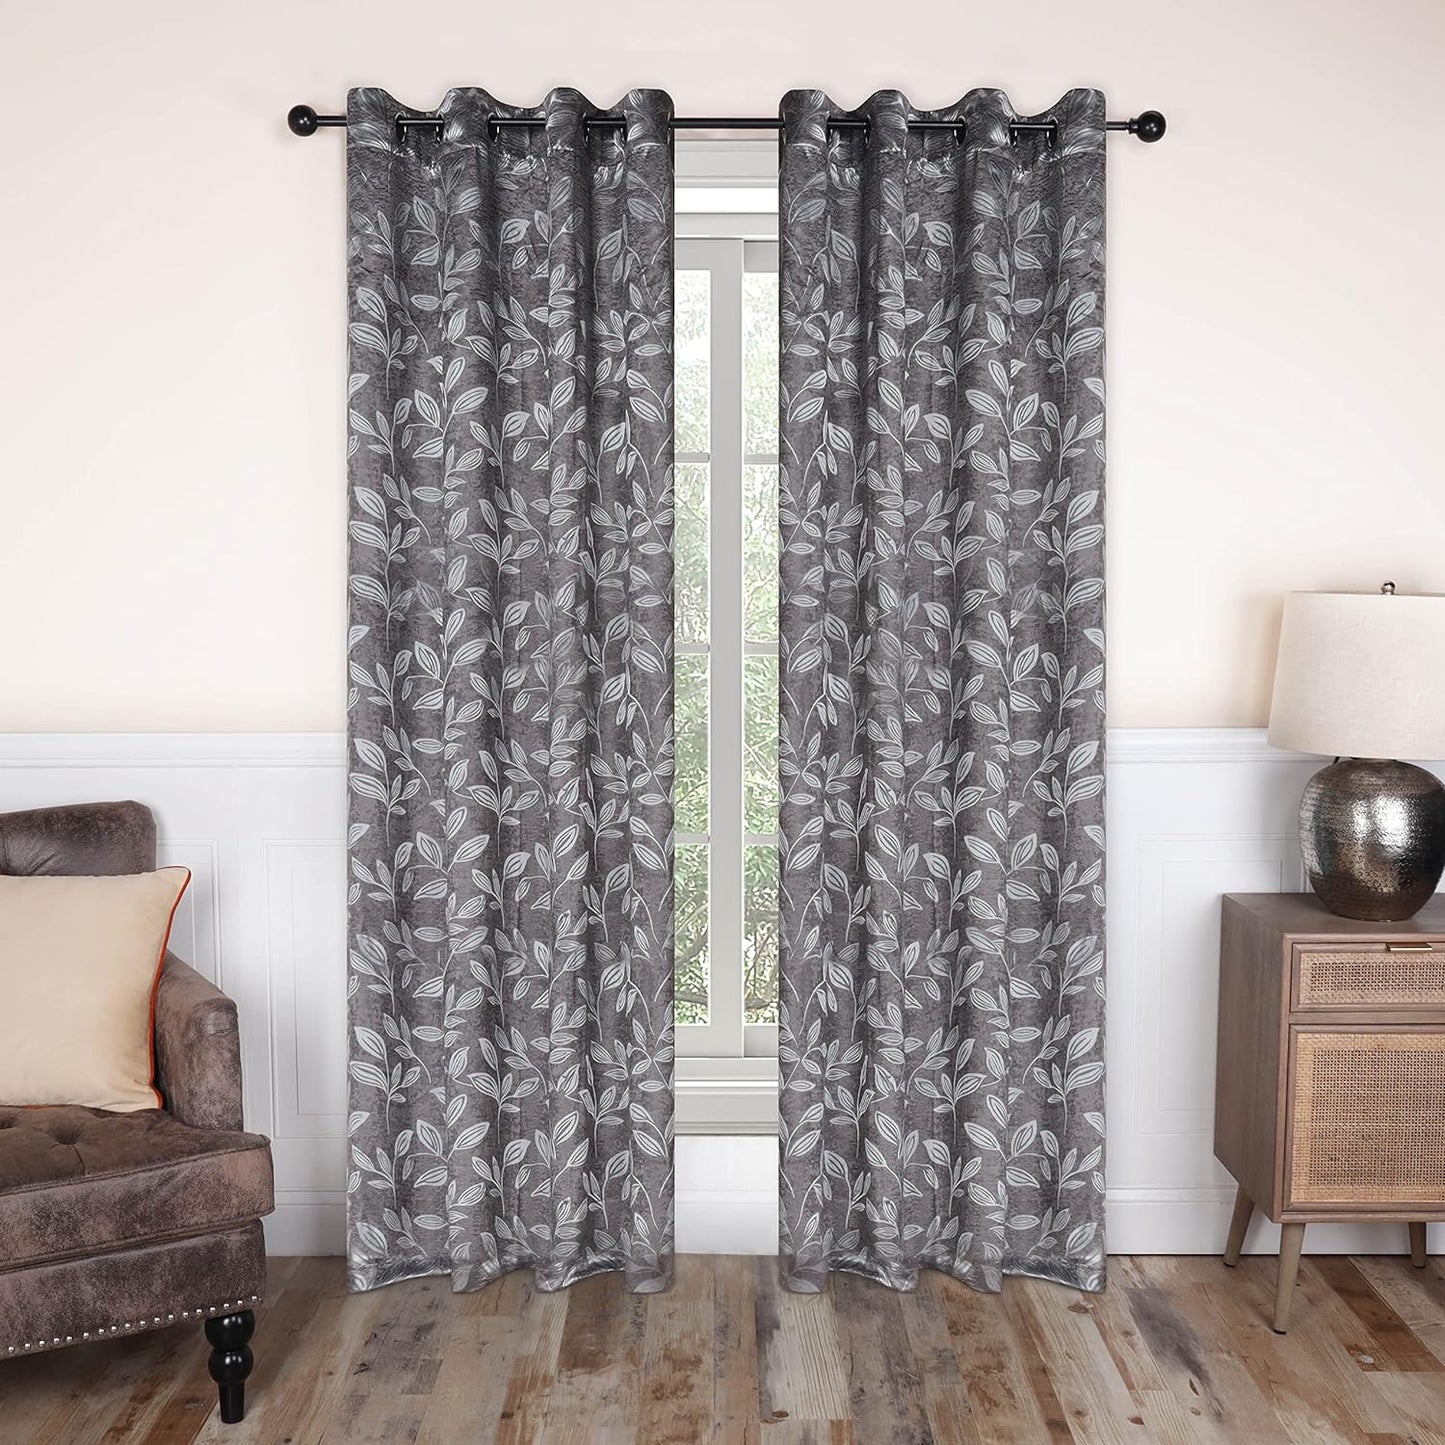 Superior Blackout Curtains, Room Darkening Window Accent for Bedroom, Sun Blocking, Thermal, Modern Bohemian Curtains, Leaves Collection, Set of 2 Panels, Rod Pocket - 52 in X 63 In, Nickel Black  Home City Inc. Nickel Black 52 In X 108 In (W X L) 